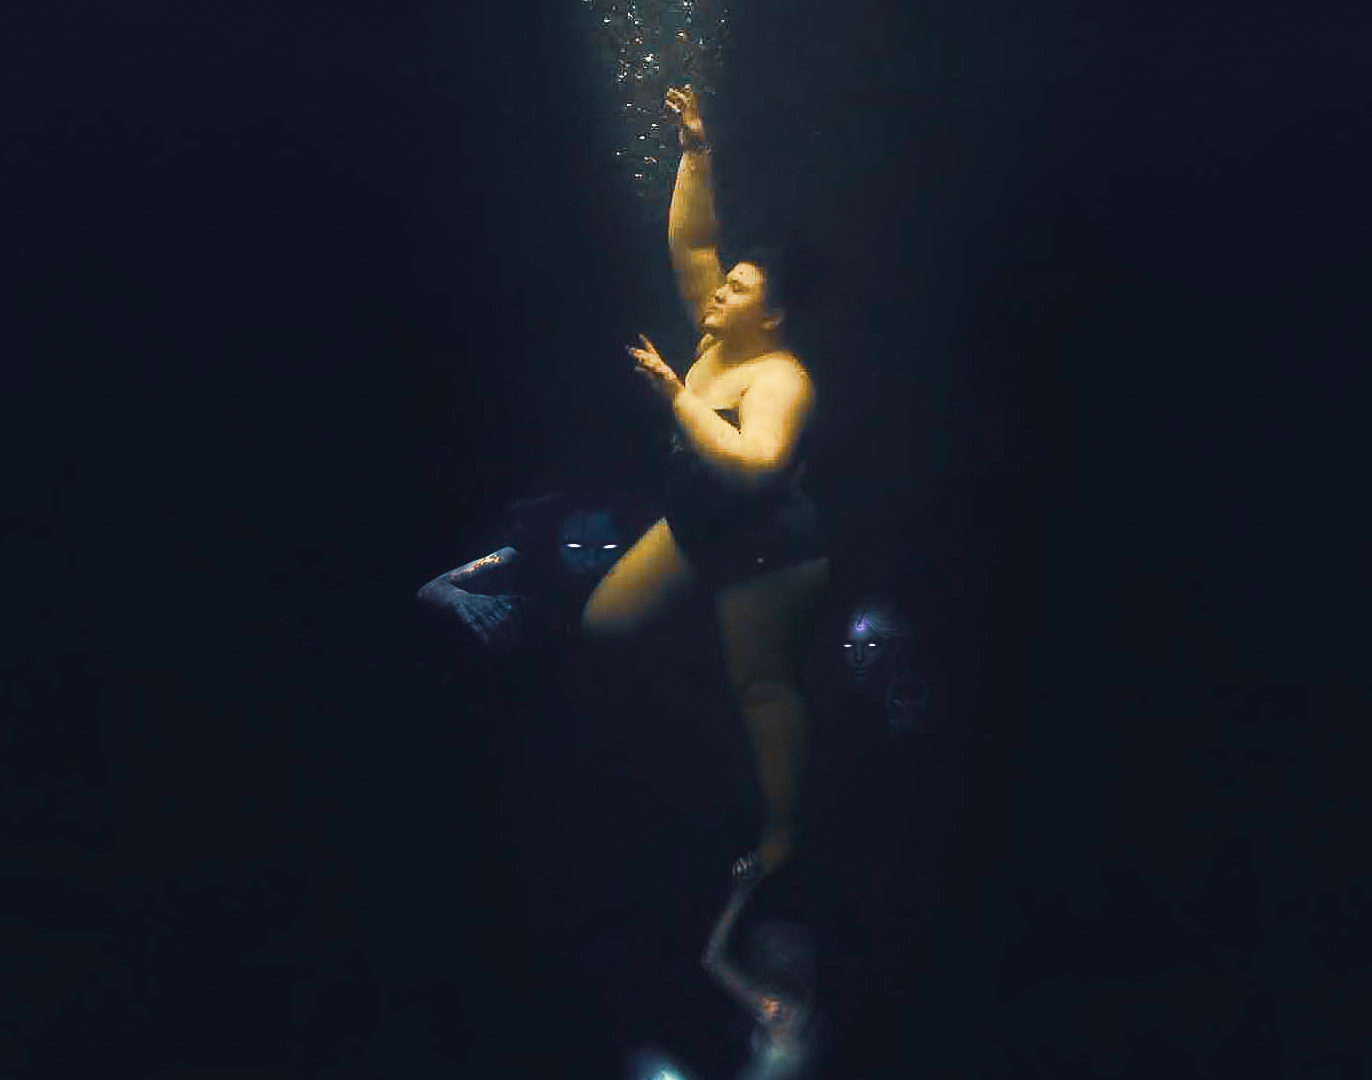 a picture of a woman underwater being dragged down by mermaids